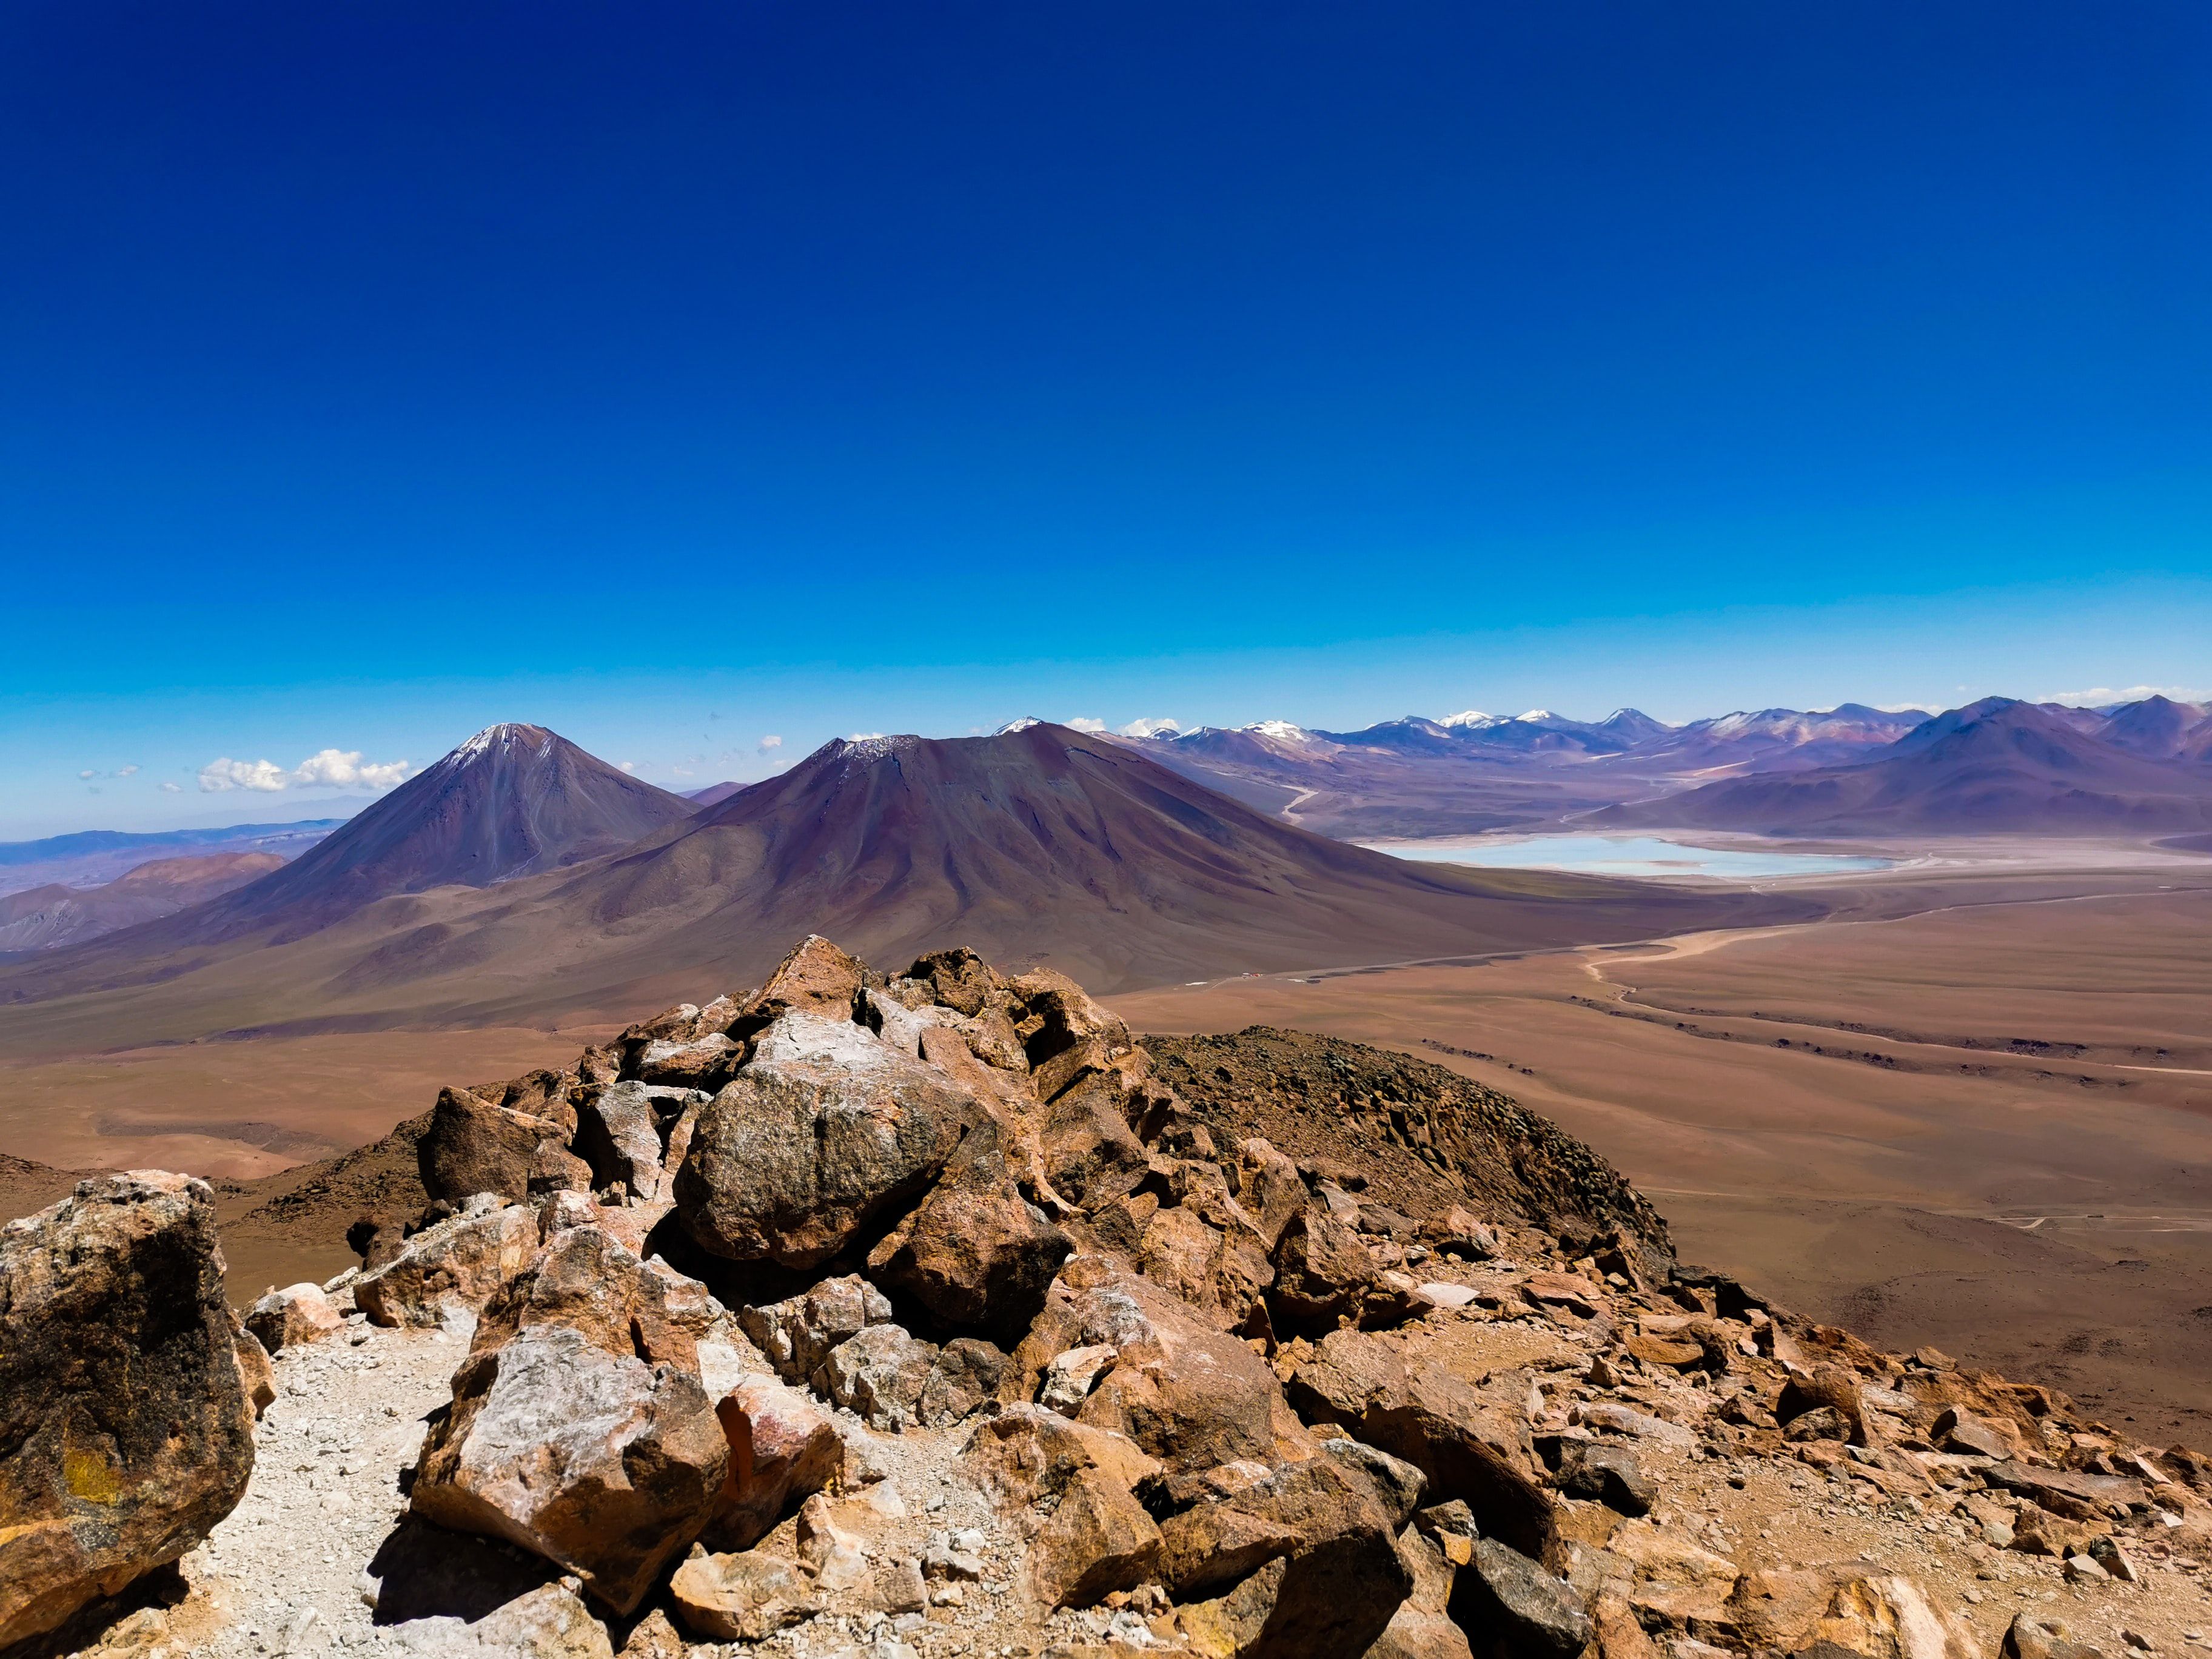 Views from the summit of Cerro Toco, one of the best hikes in Chile